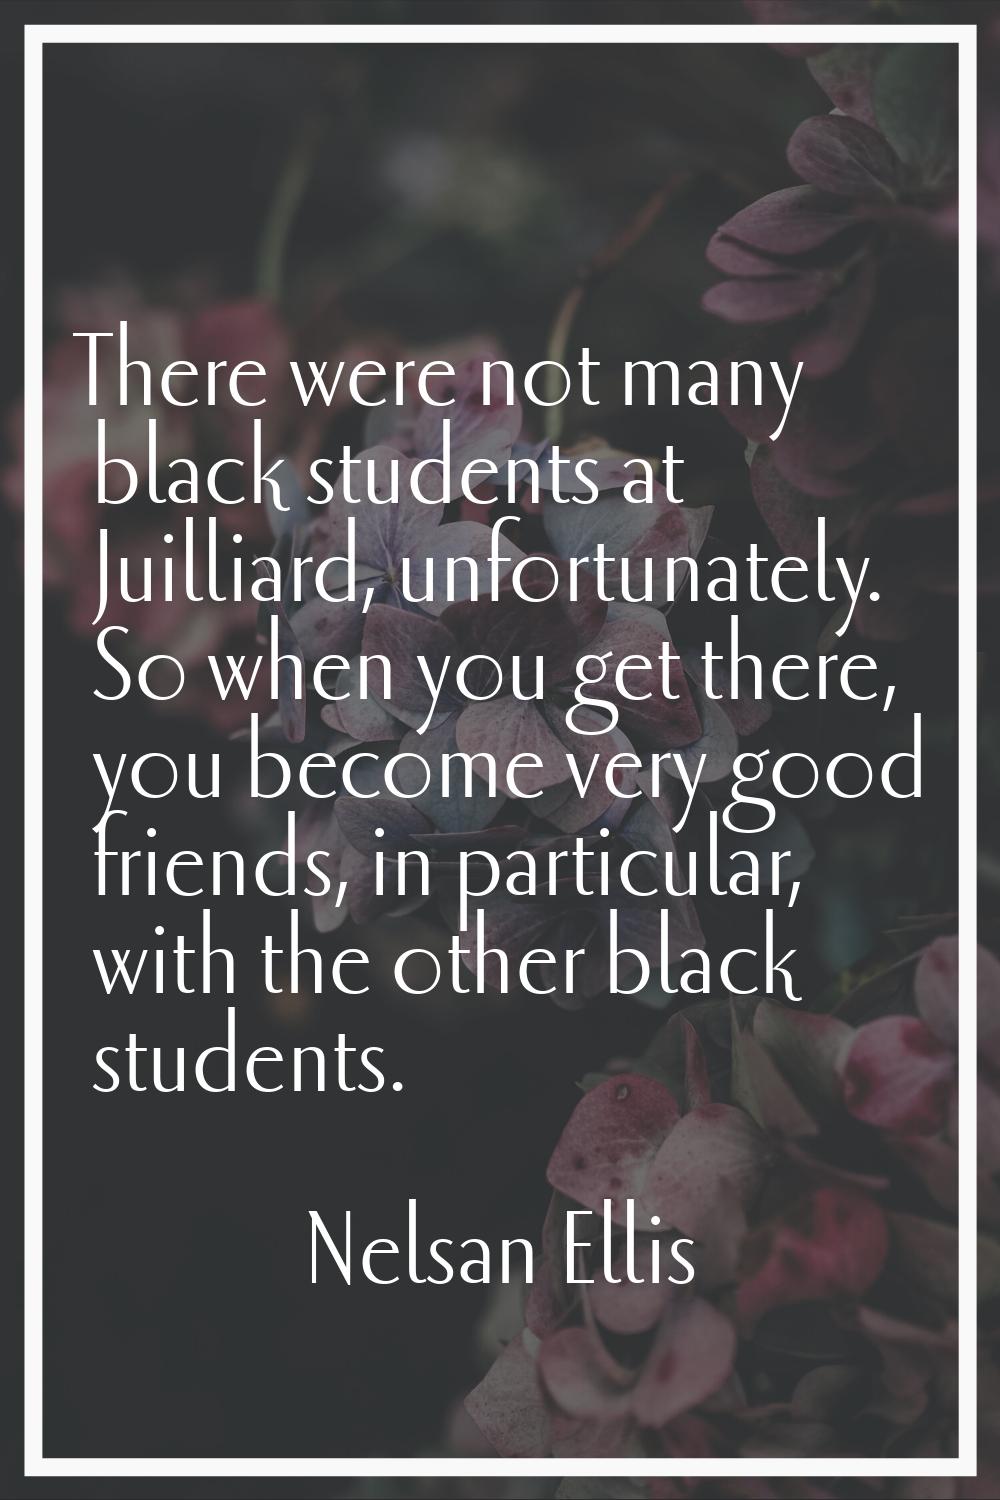 There were not many black students at Juilliard, unfortunately. So when you get there, you become v